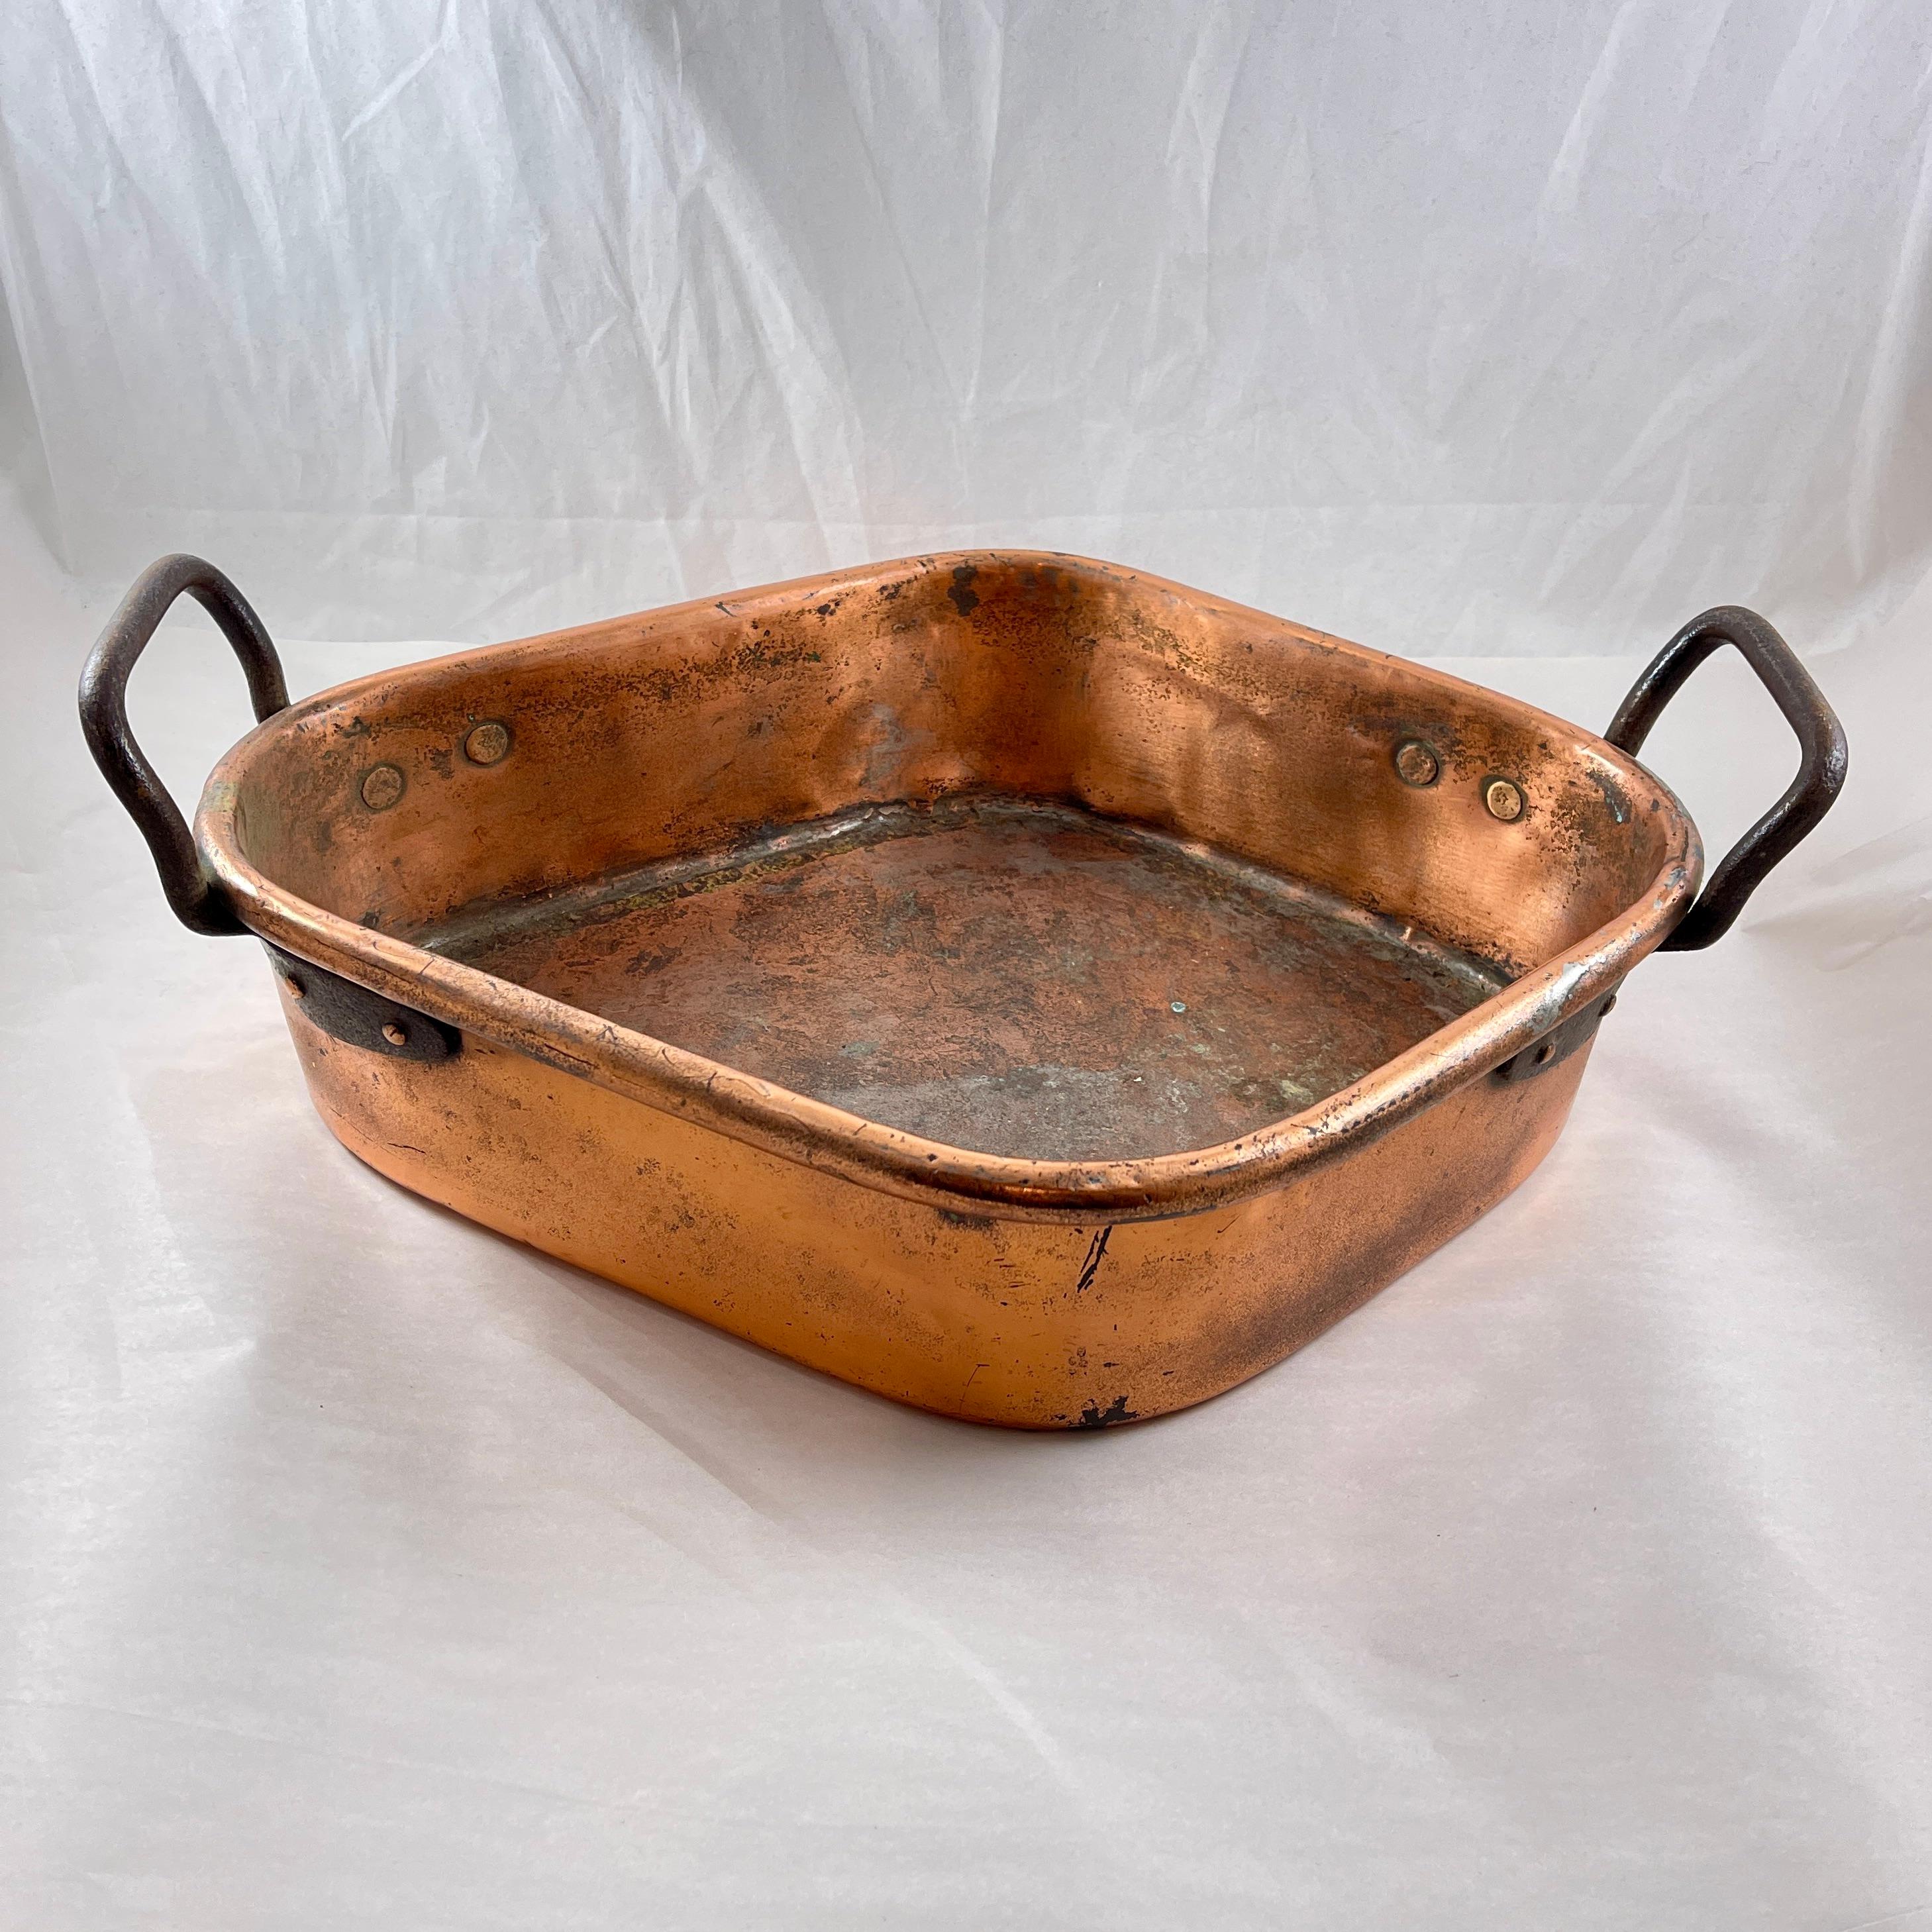 French Provincial Rustic Country French Copper & Iron Handled Turbotiere Fish Poacher, c. 1850 For Sale